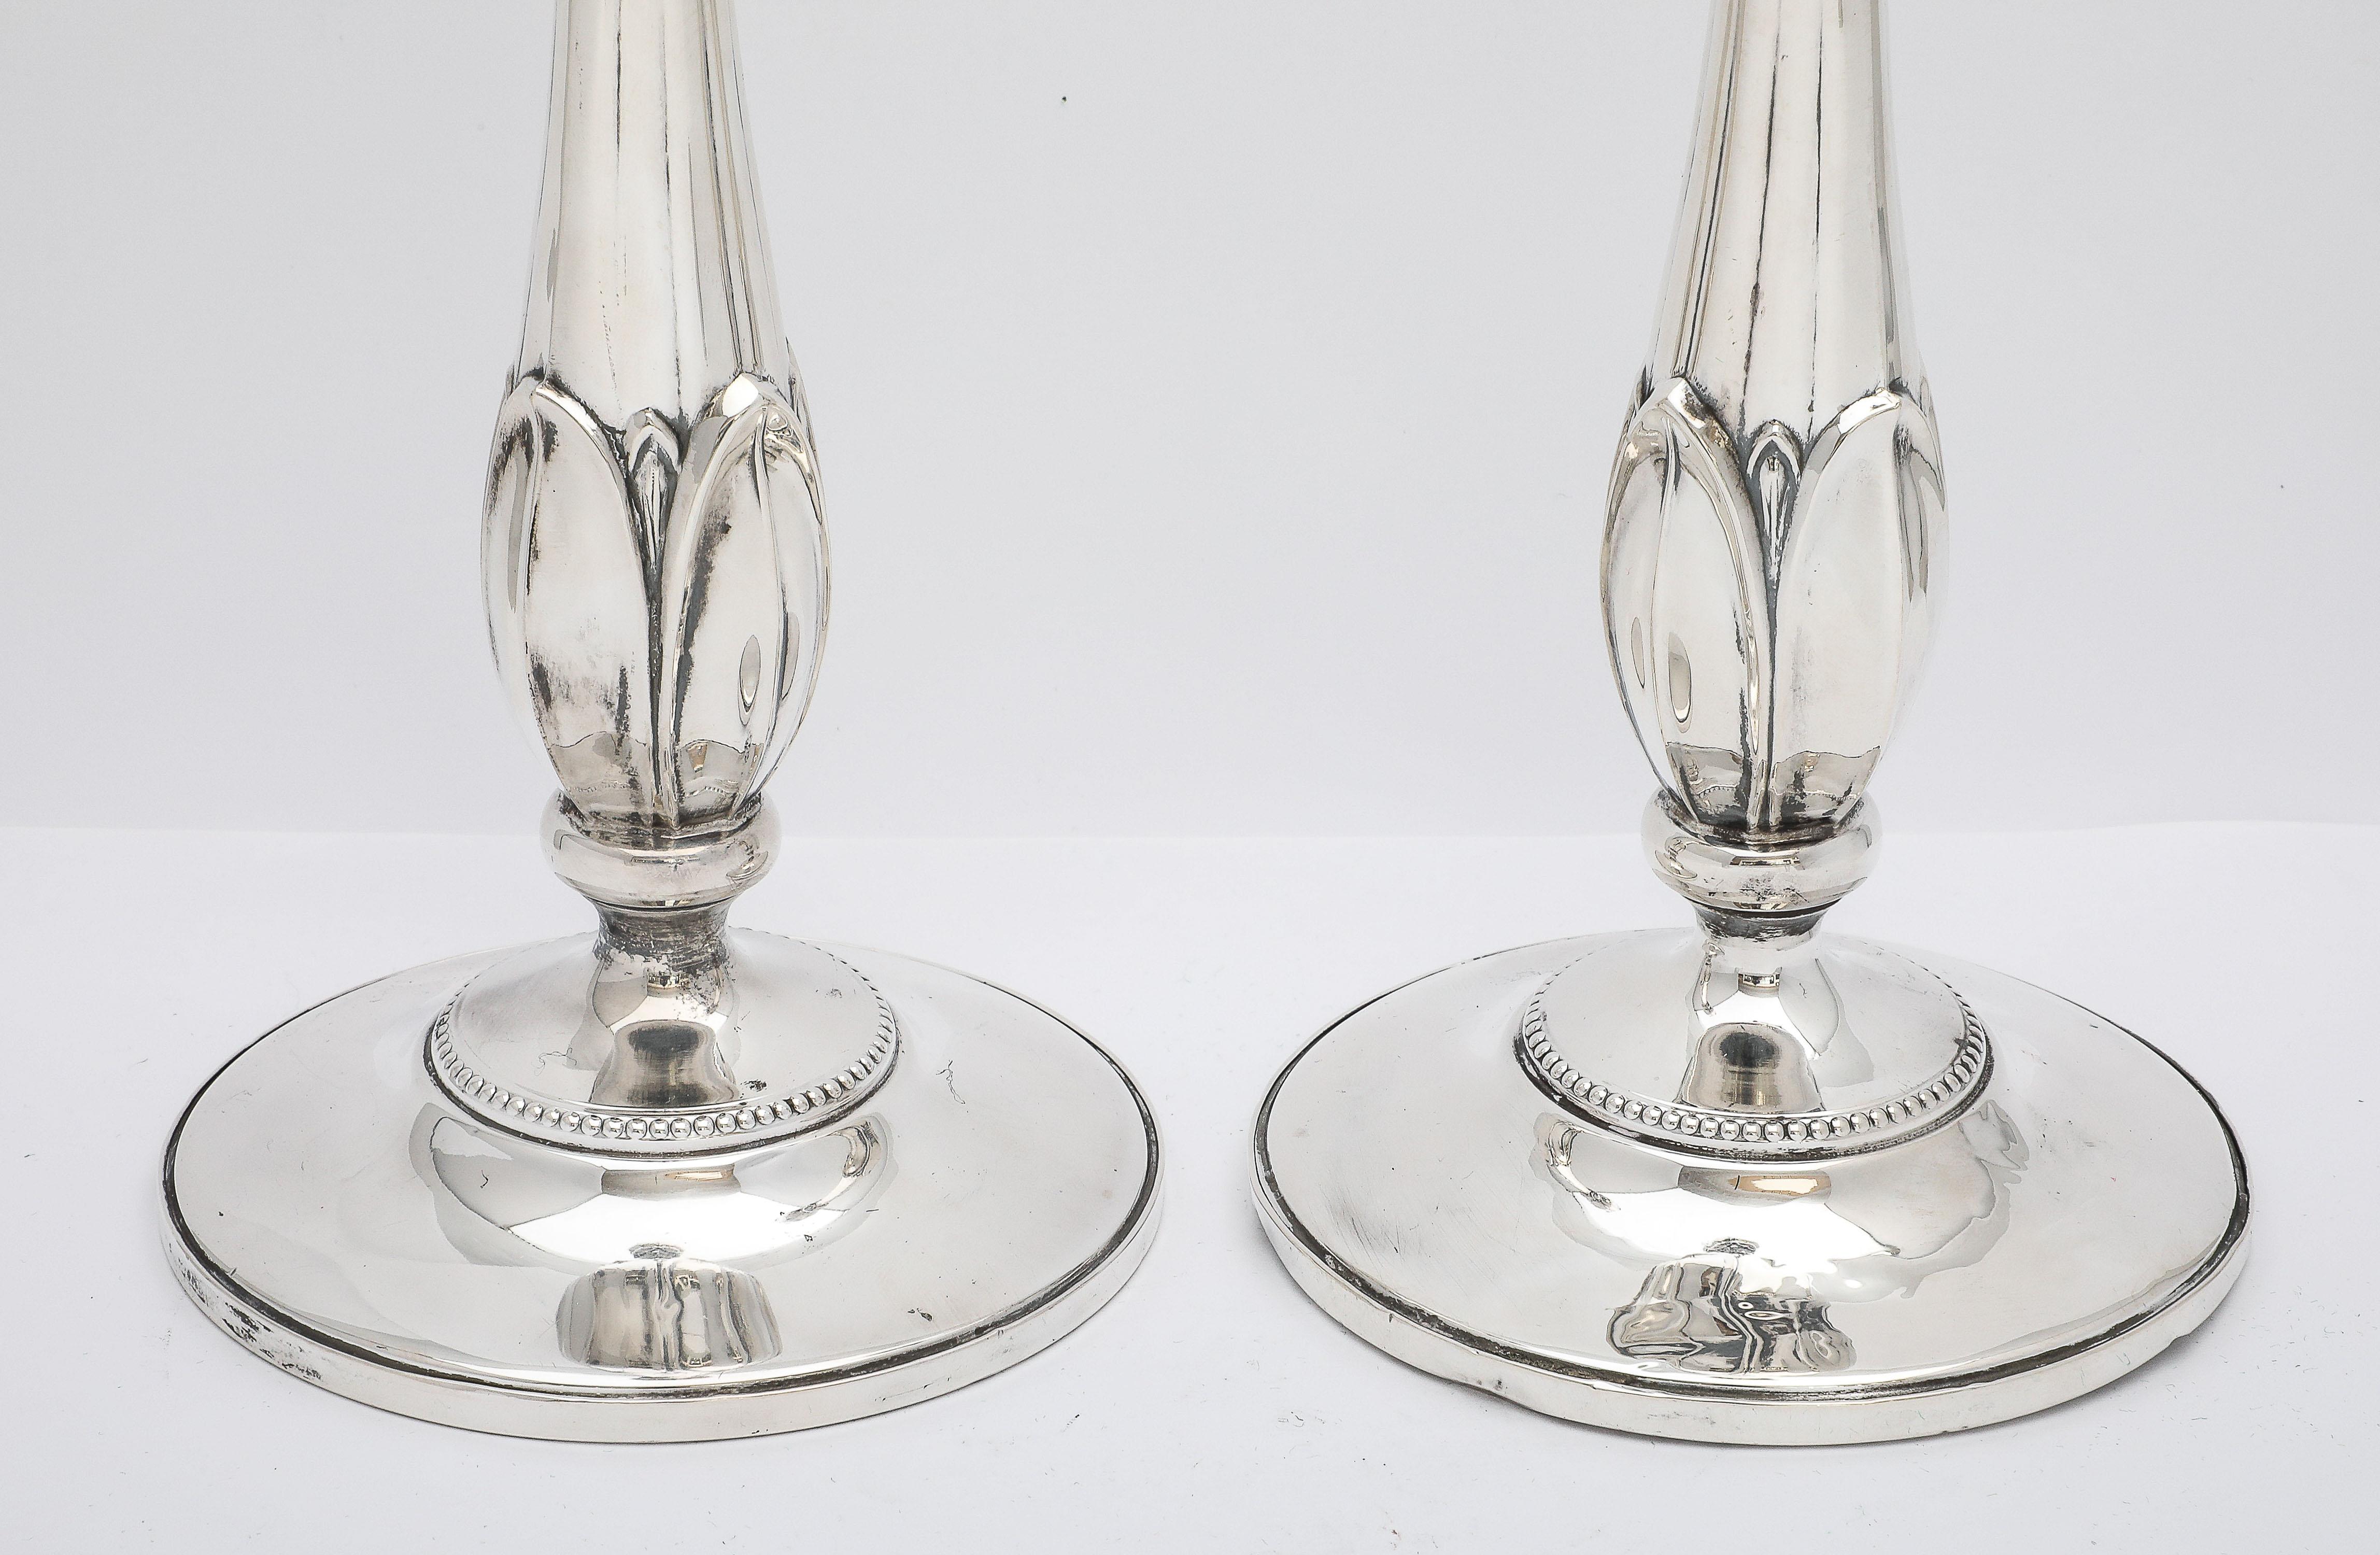 Rare Pair of Tall Sterling Silver Art Nouveau-Style Flower-Form Candlesticks For Sale 3